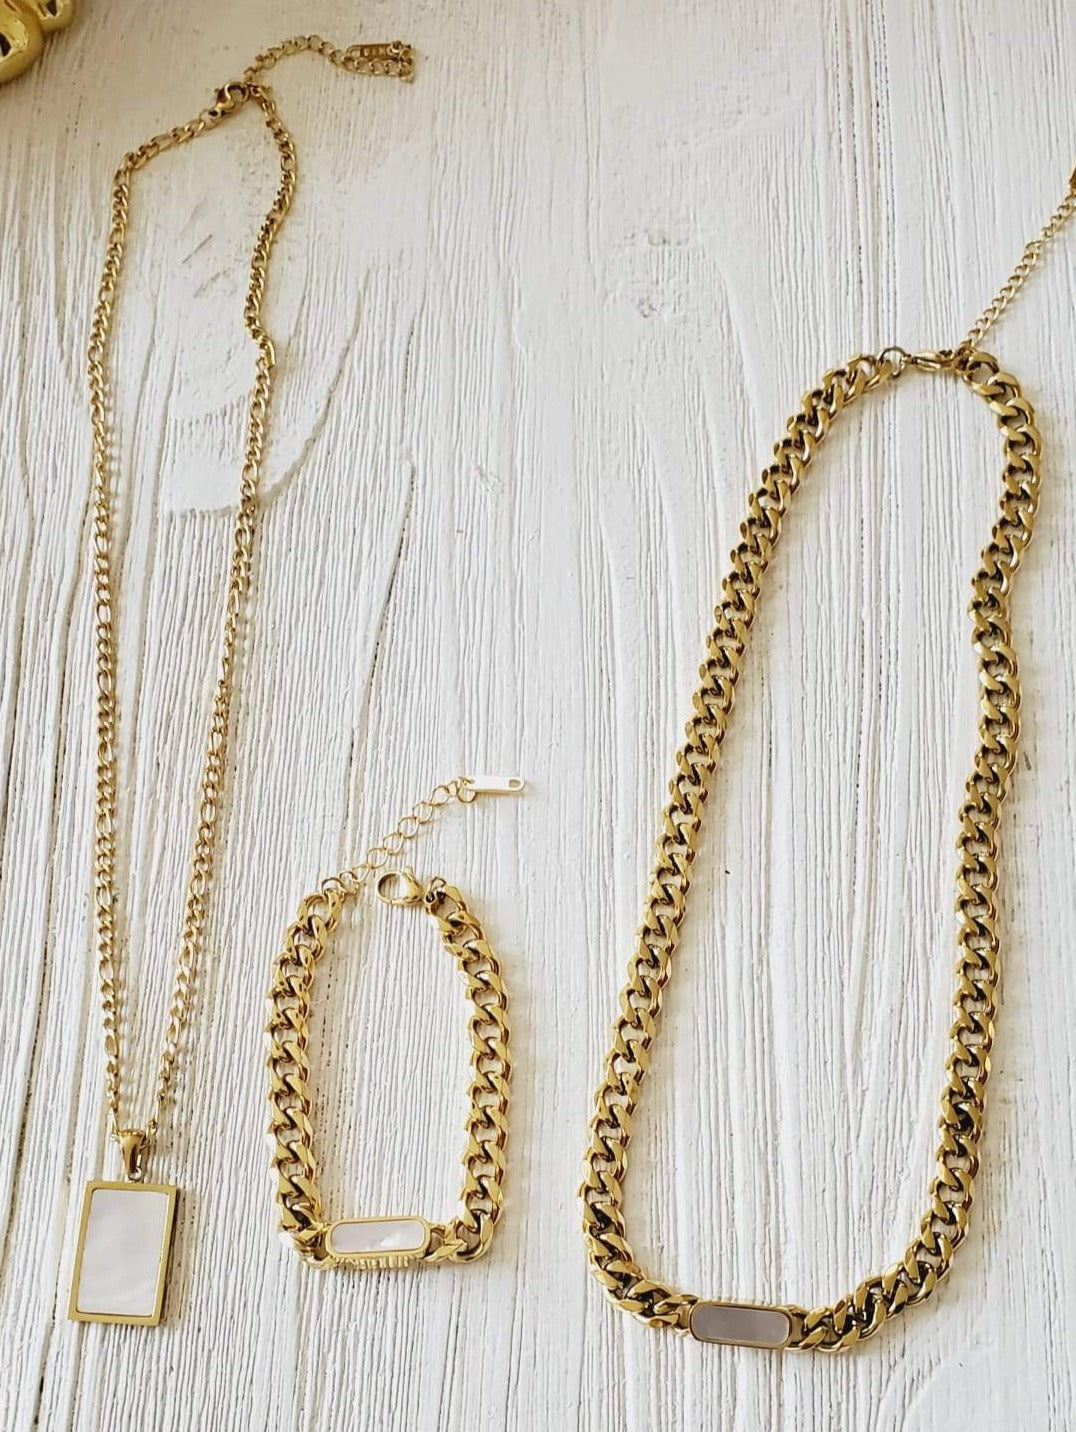 Mariner Link Chain, Heavy Chain Necklace, Thick Gold Chain, Chunky Gold Choker, Puffy Mariner Chain, Gold Mariner Chain, Gold Anchor Link, Puff Link Chain, Mariner Necklace, Puffy Link Necklace, Gold Puff Chain, Thick Puff Necklace, Mother Pearl Cuban chain, Mother Pearls cuban necklace, white necklace, white jewelry, white jewelry set, mother pearl jewelry set, white nacar jewelry set